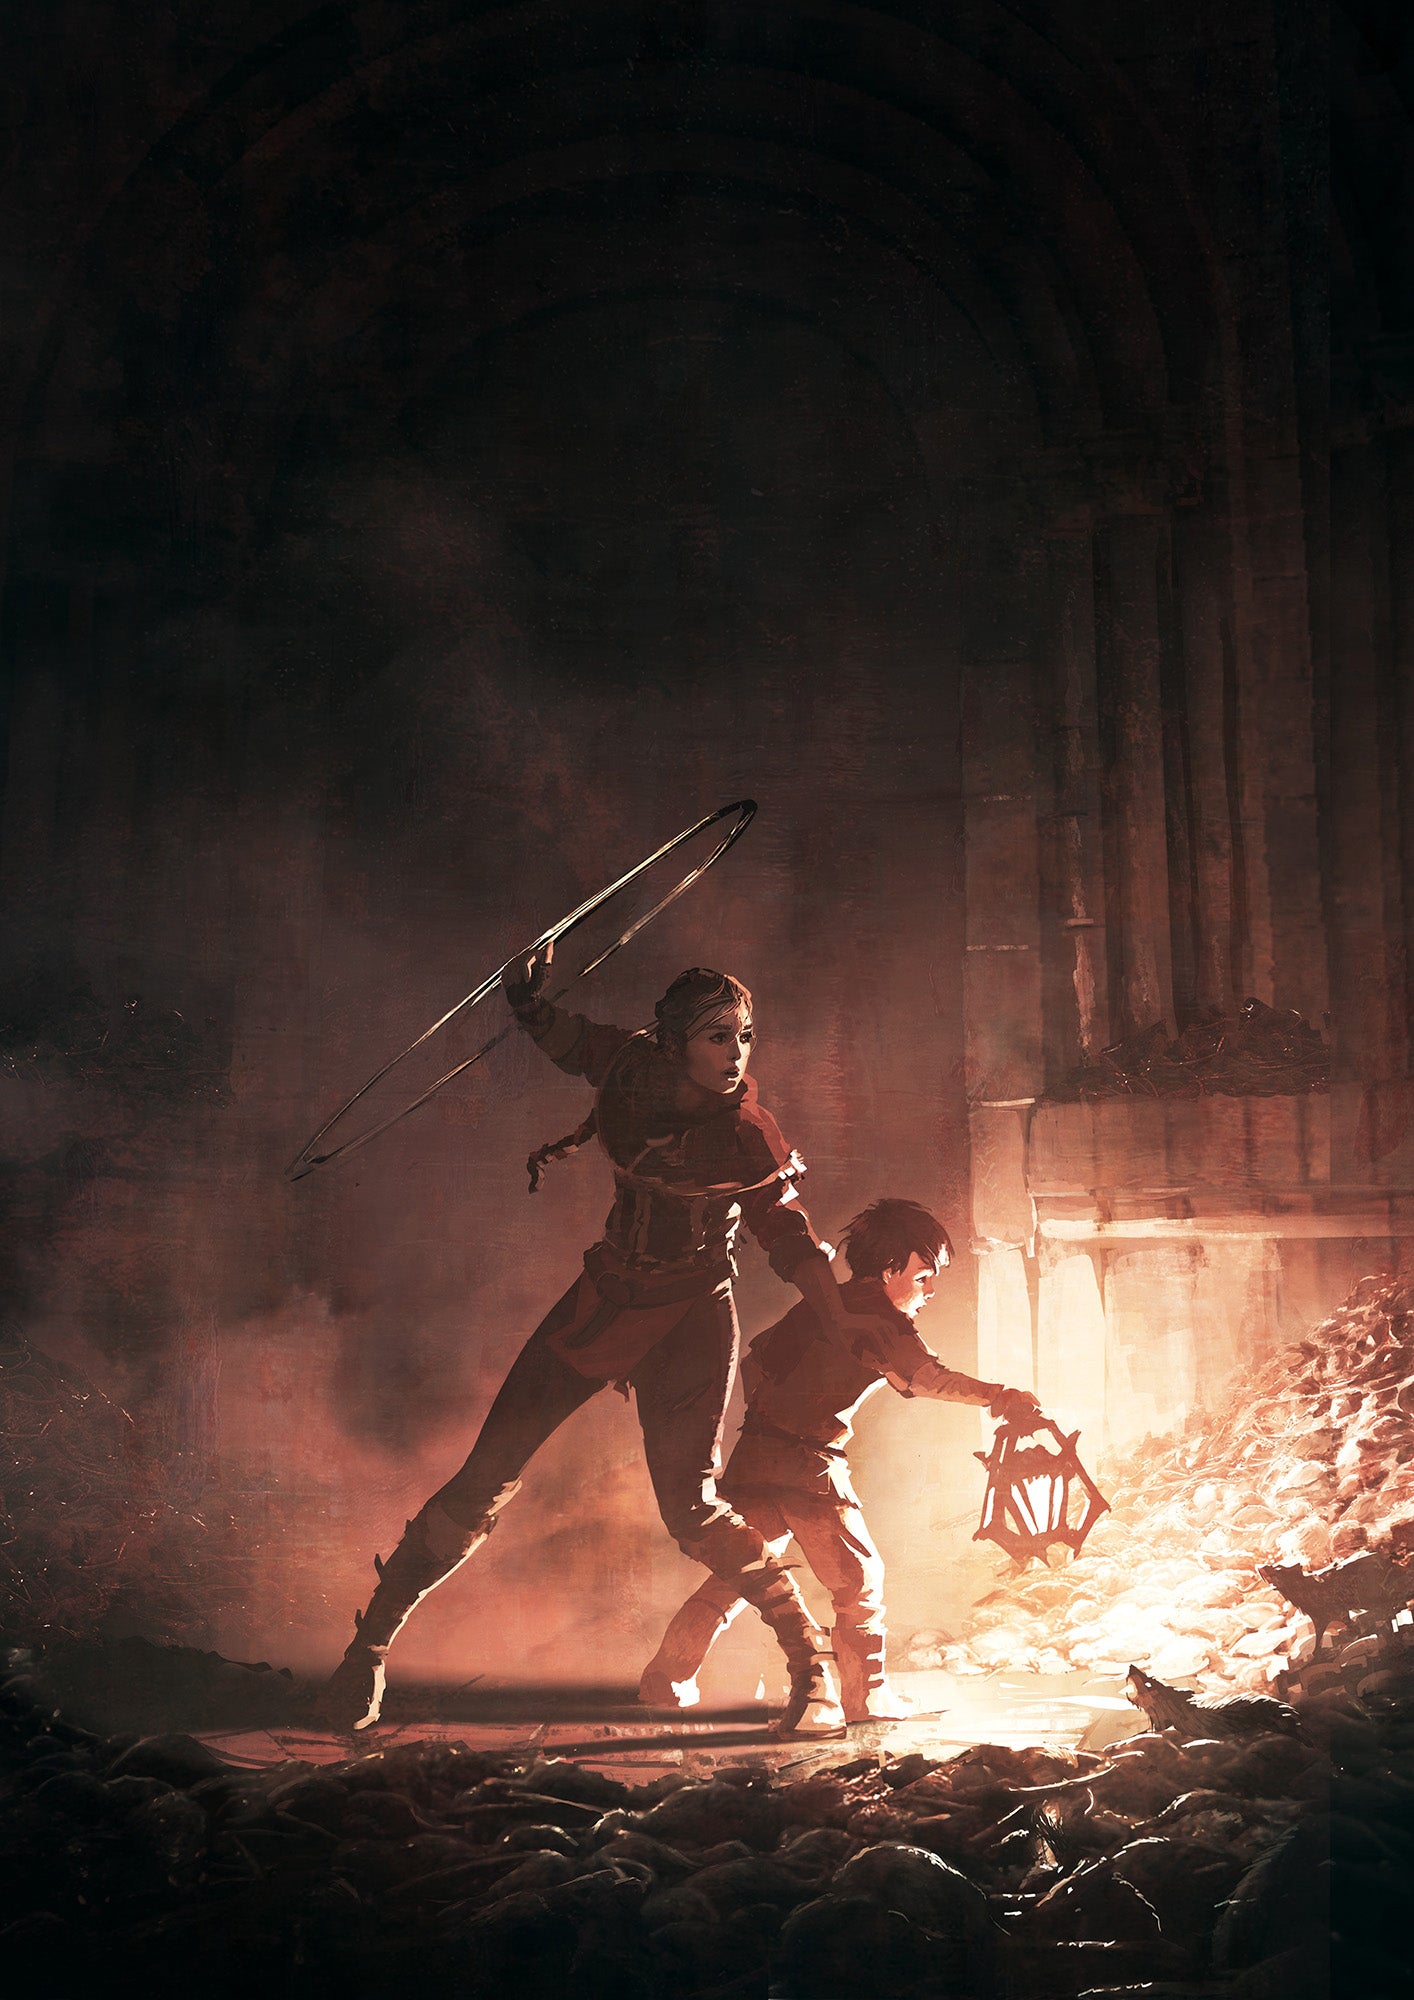 Concept art showing a young woman, Amicia, with a young boy, Hugo, surrounded by darkness and a hungry swarm of rats.